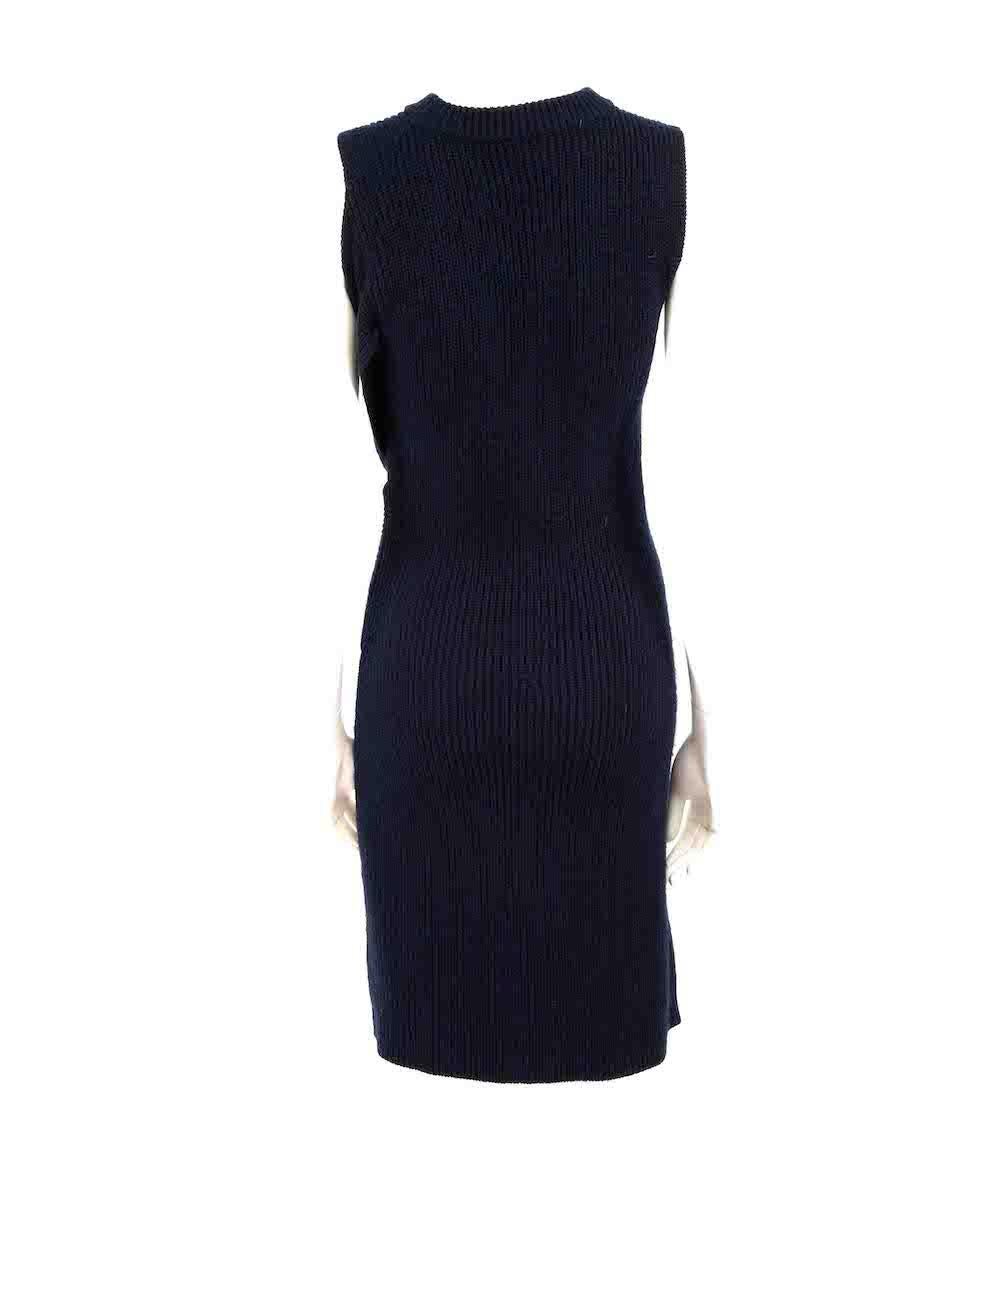 3.1 Phillip Lim Navy Wool Twist Mini Knit Dress Size S In Good Condition For Sale In London, GB